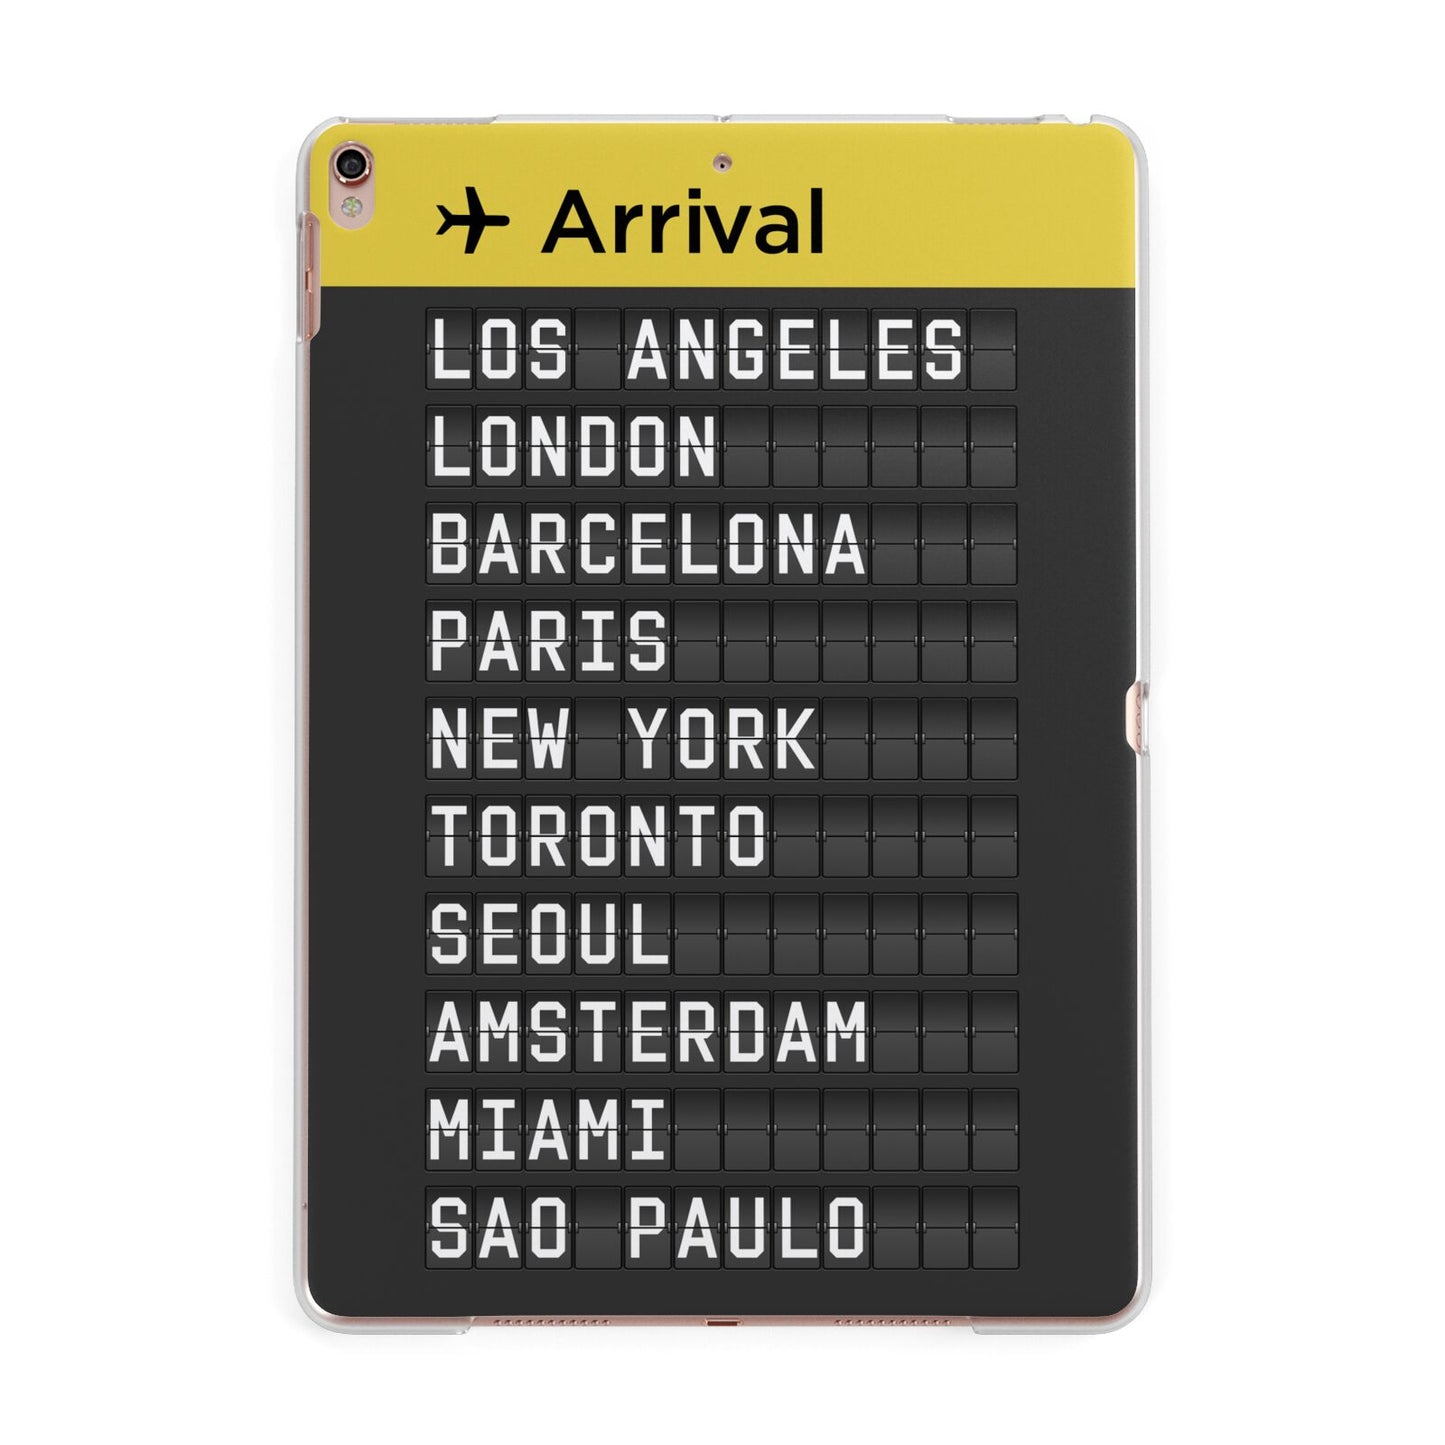 Airport Arrivals Board Apple iPad Rose Gold Case